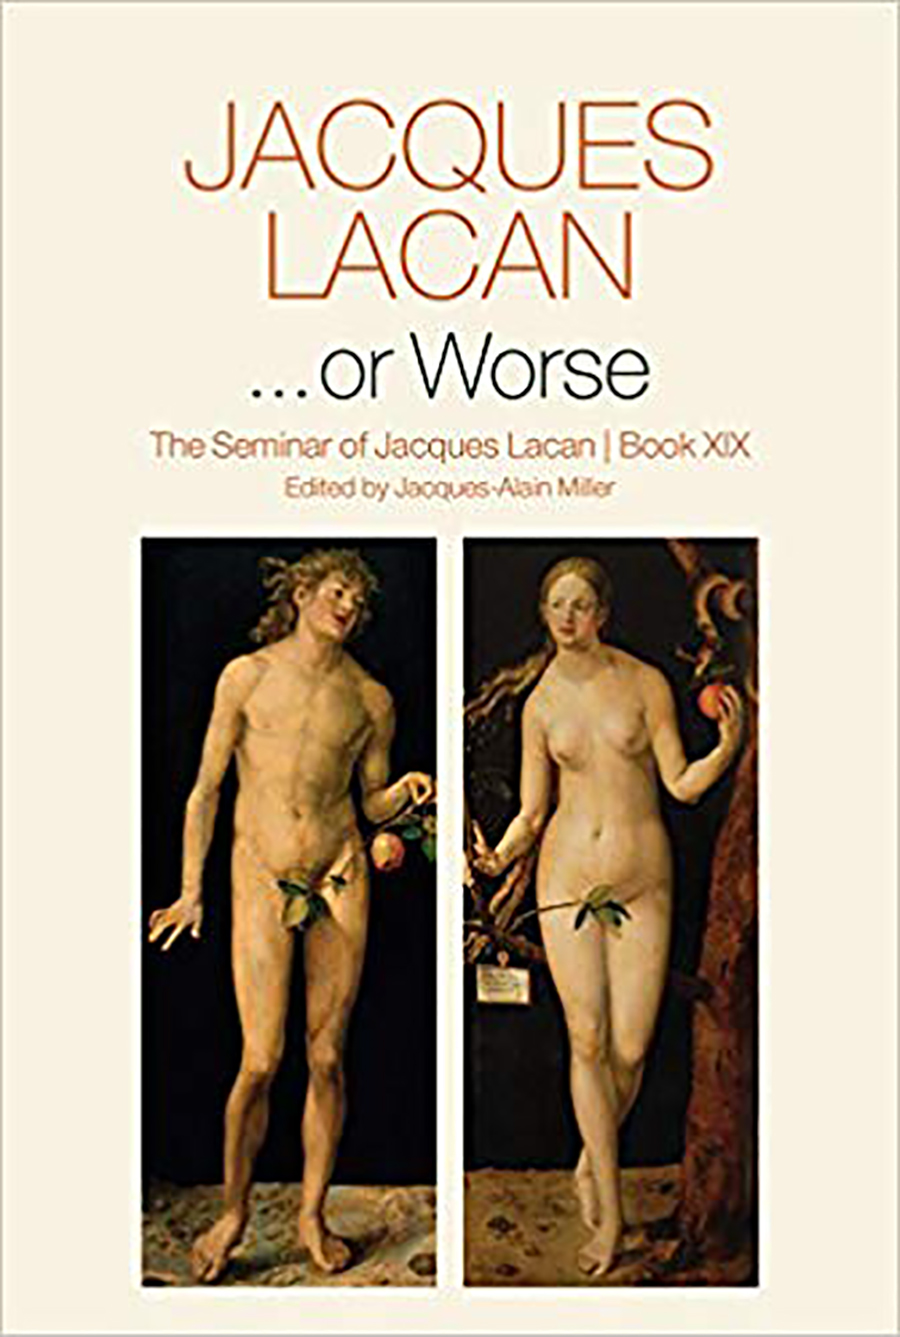 Jacques-lacan-the-seminar-of-jacques-lacan-book-xix-1971-1972-or-worse-theoryleaks.jpg